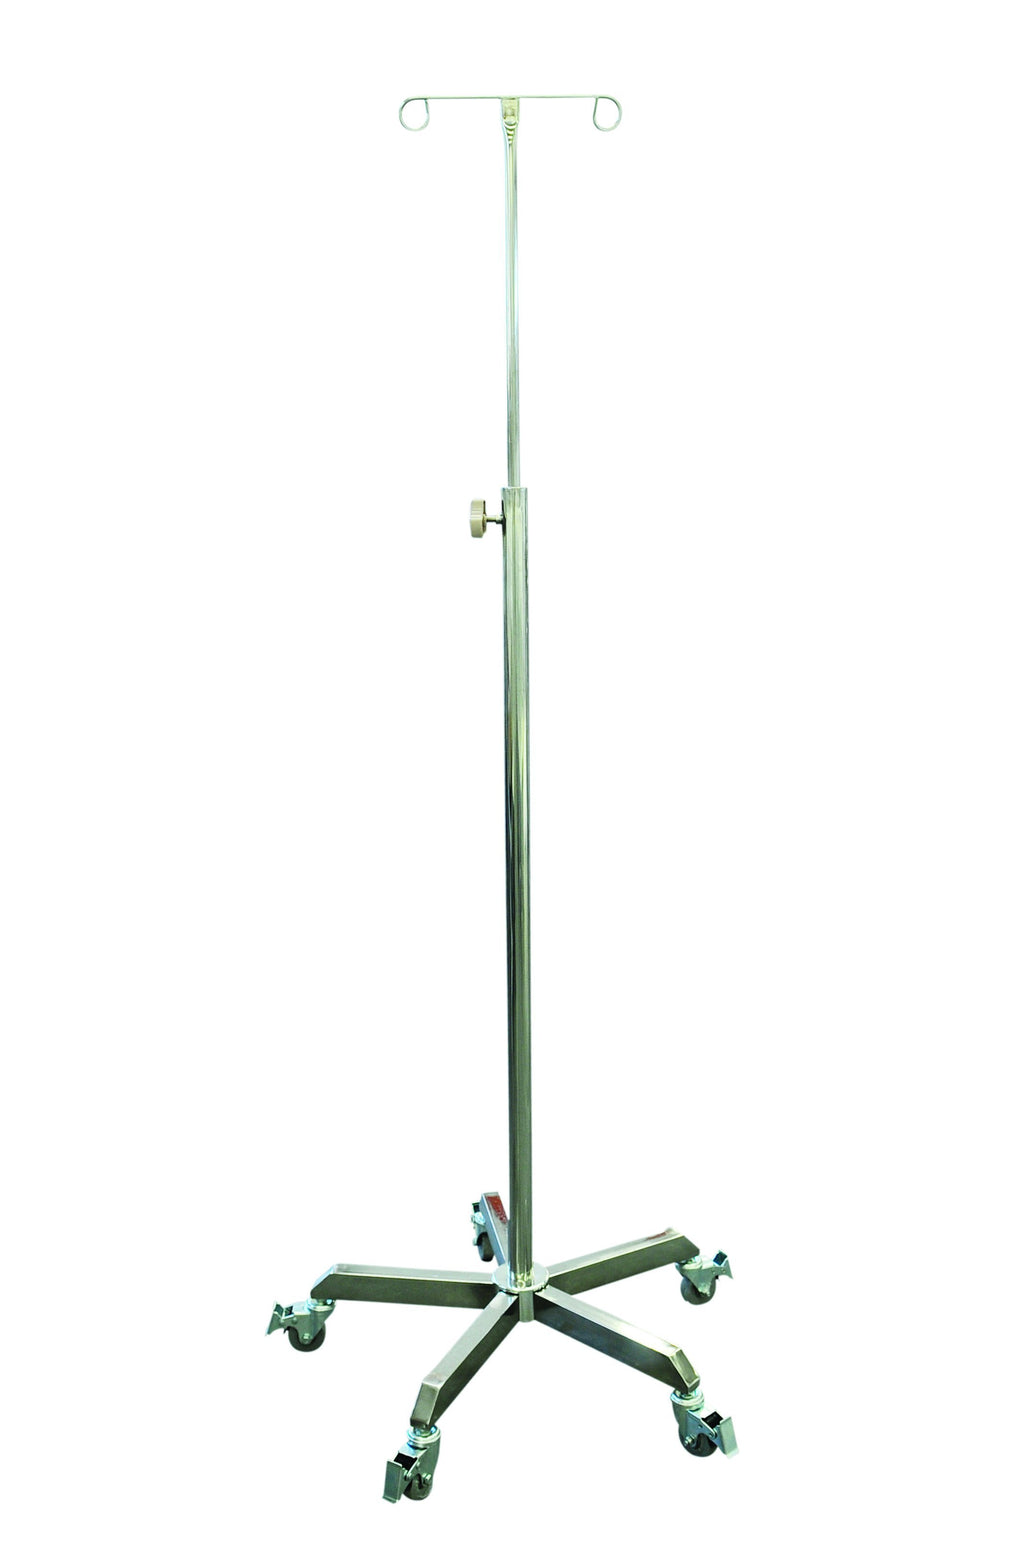 IV Pole stand, mobile drip stand, 2 hook IV stand